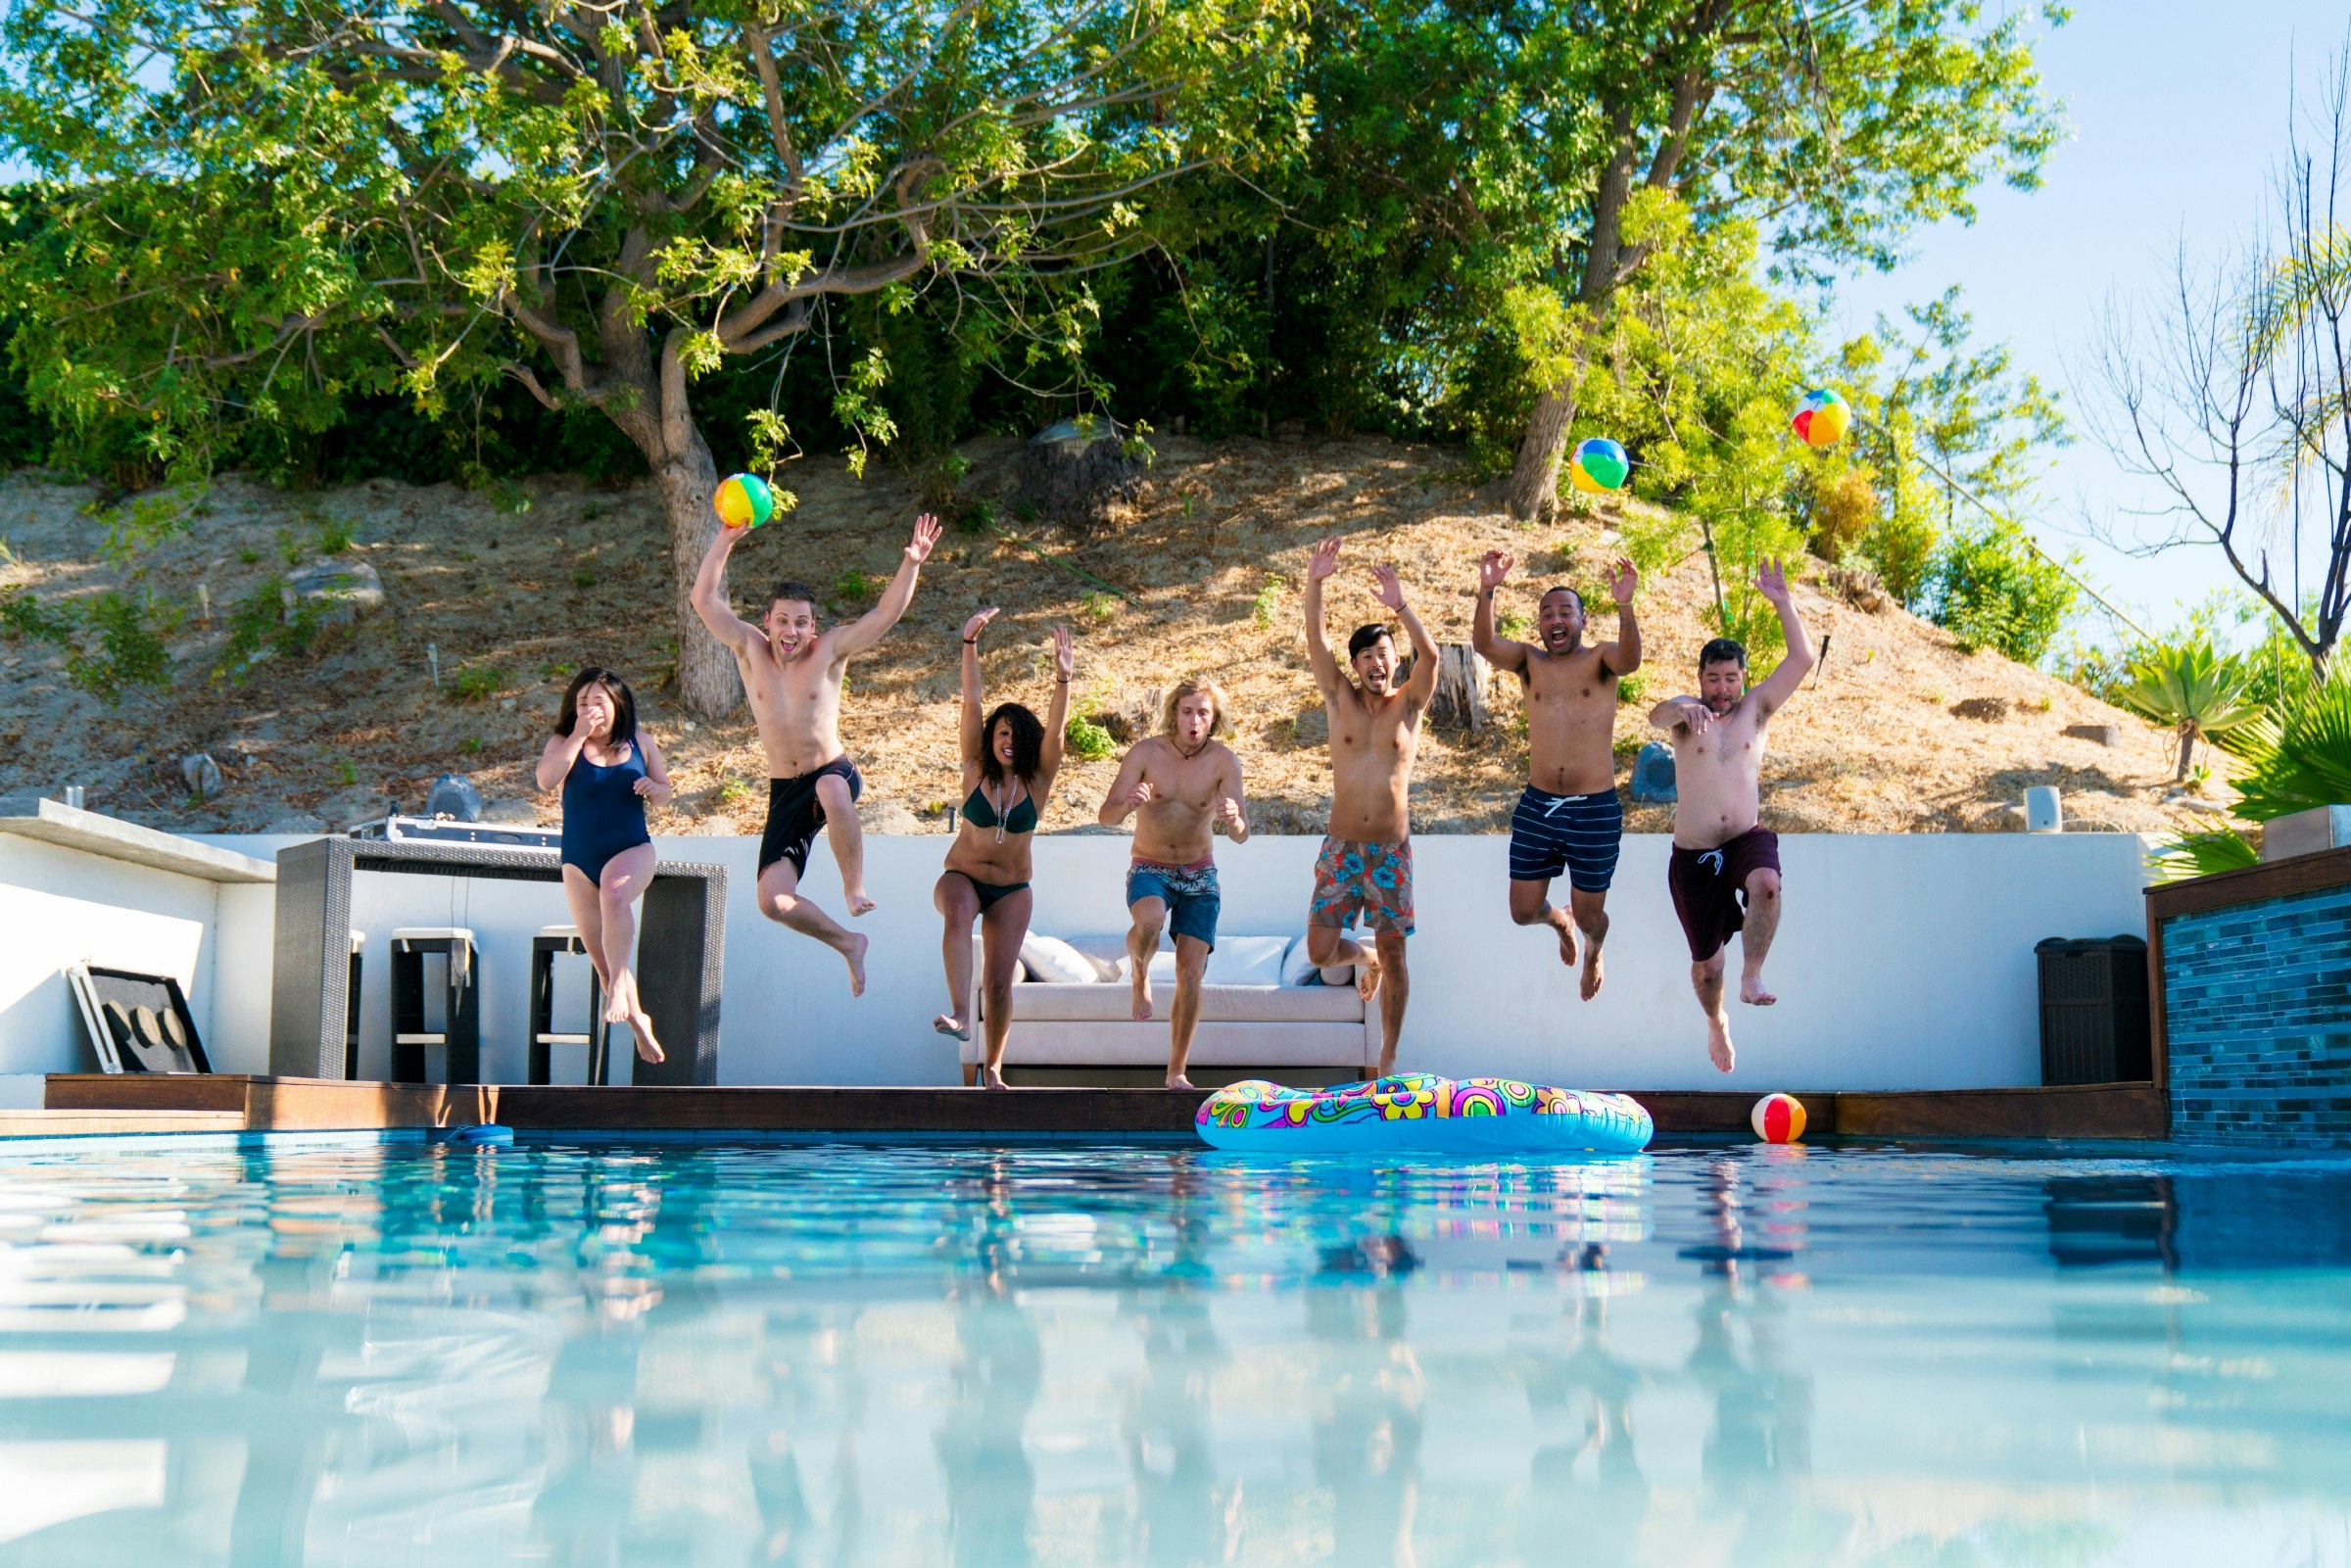  Group of six friends jumping into a swimming pool in Los Angeles on a summer day.